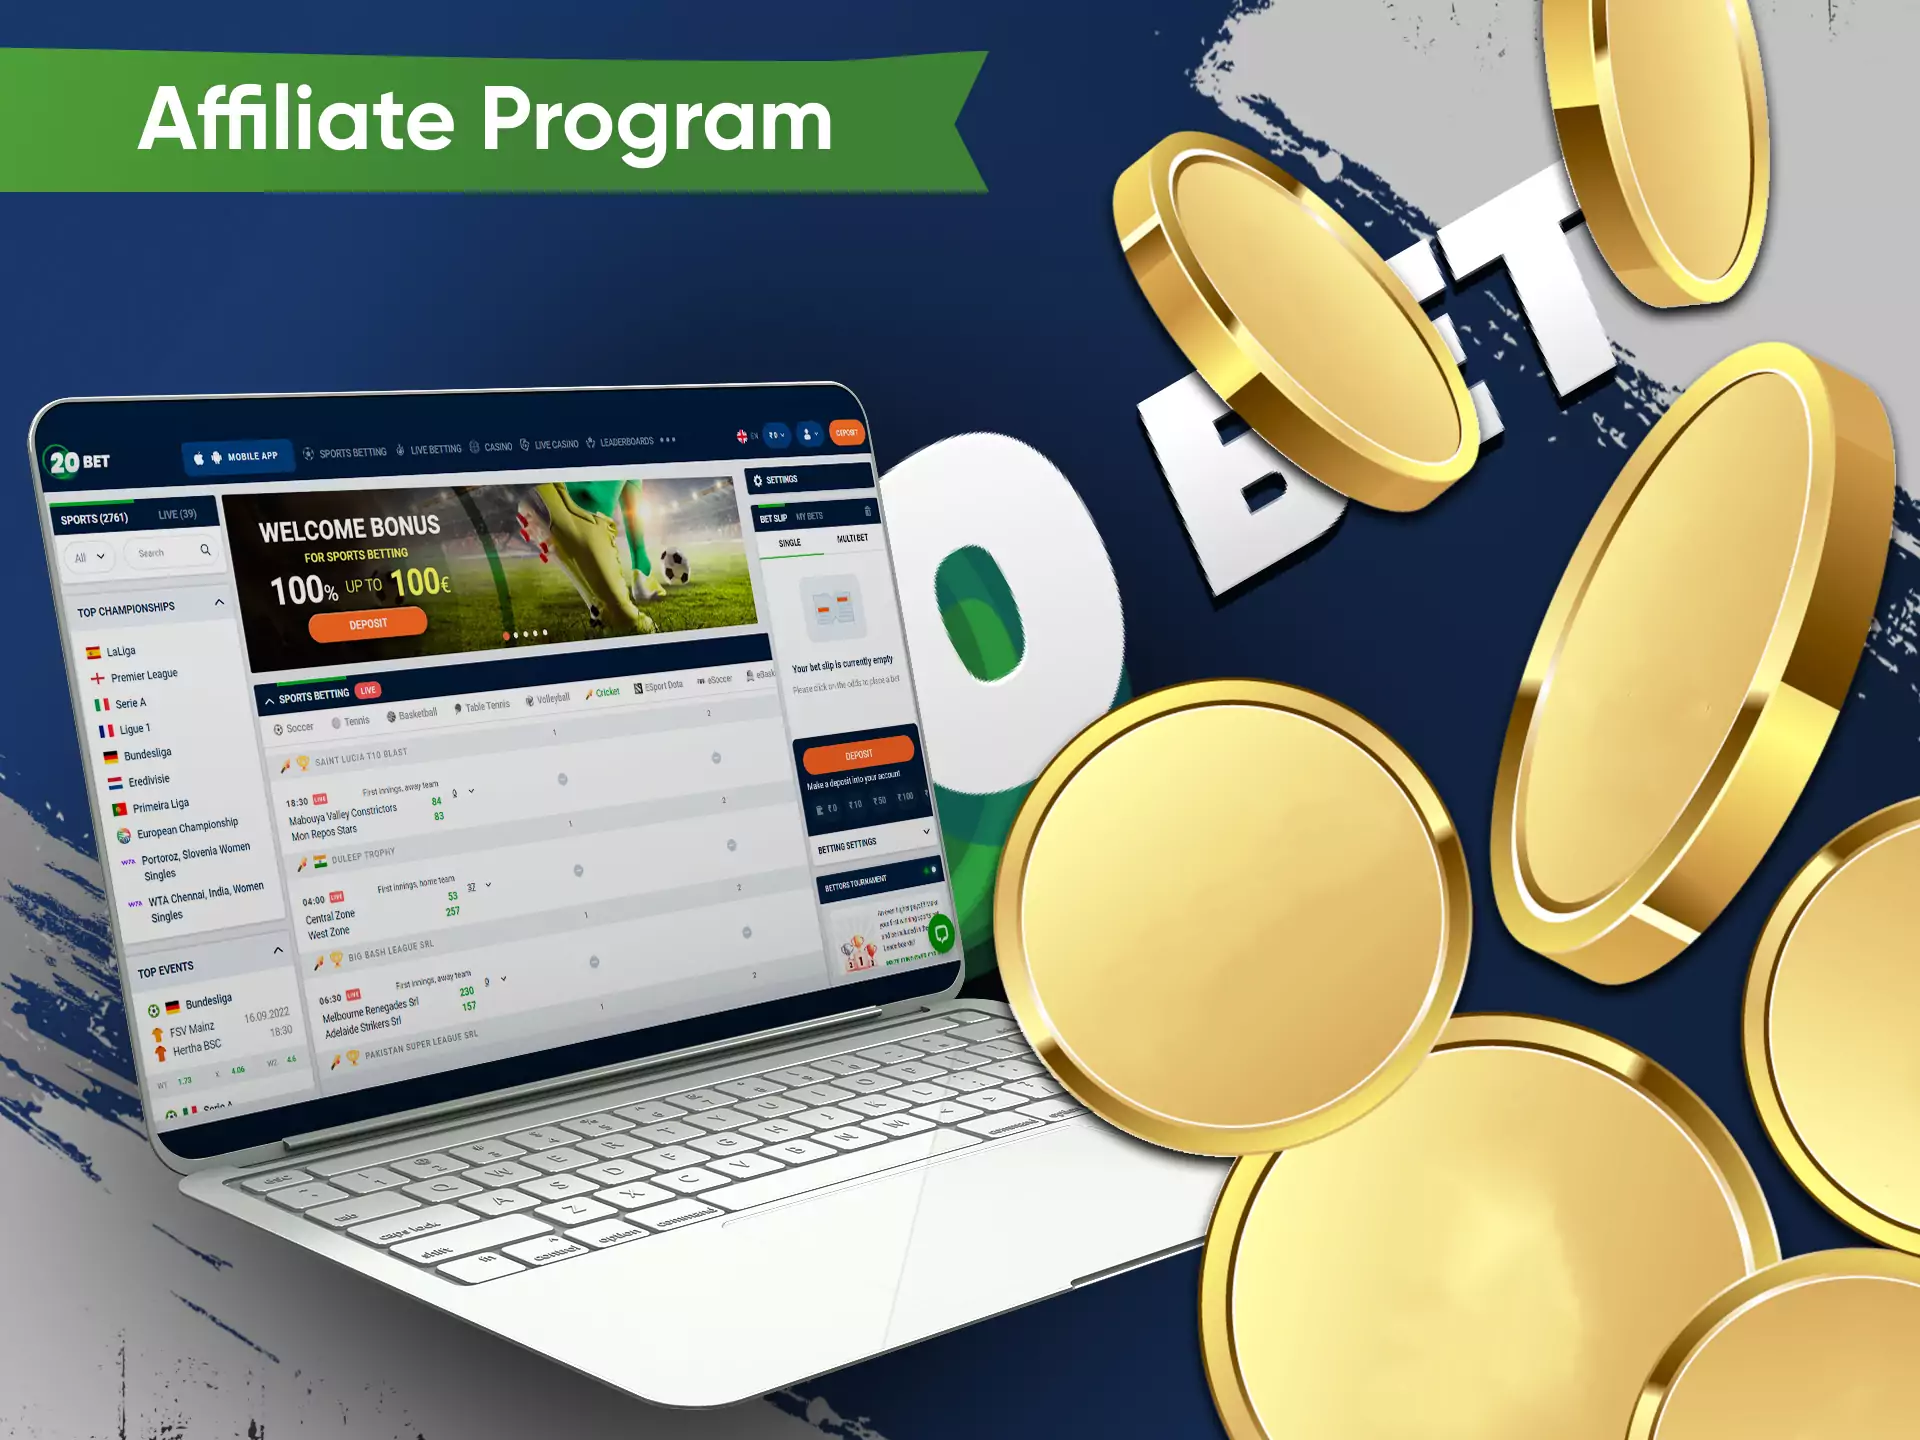 Join the affiliate program of 20bet and get complimentary bonuses.